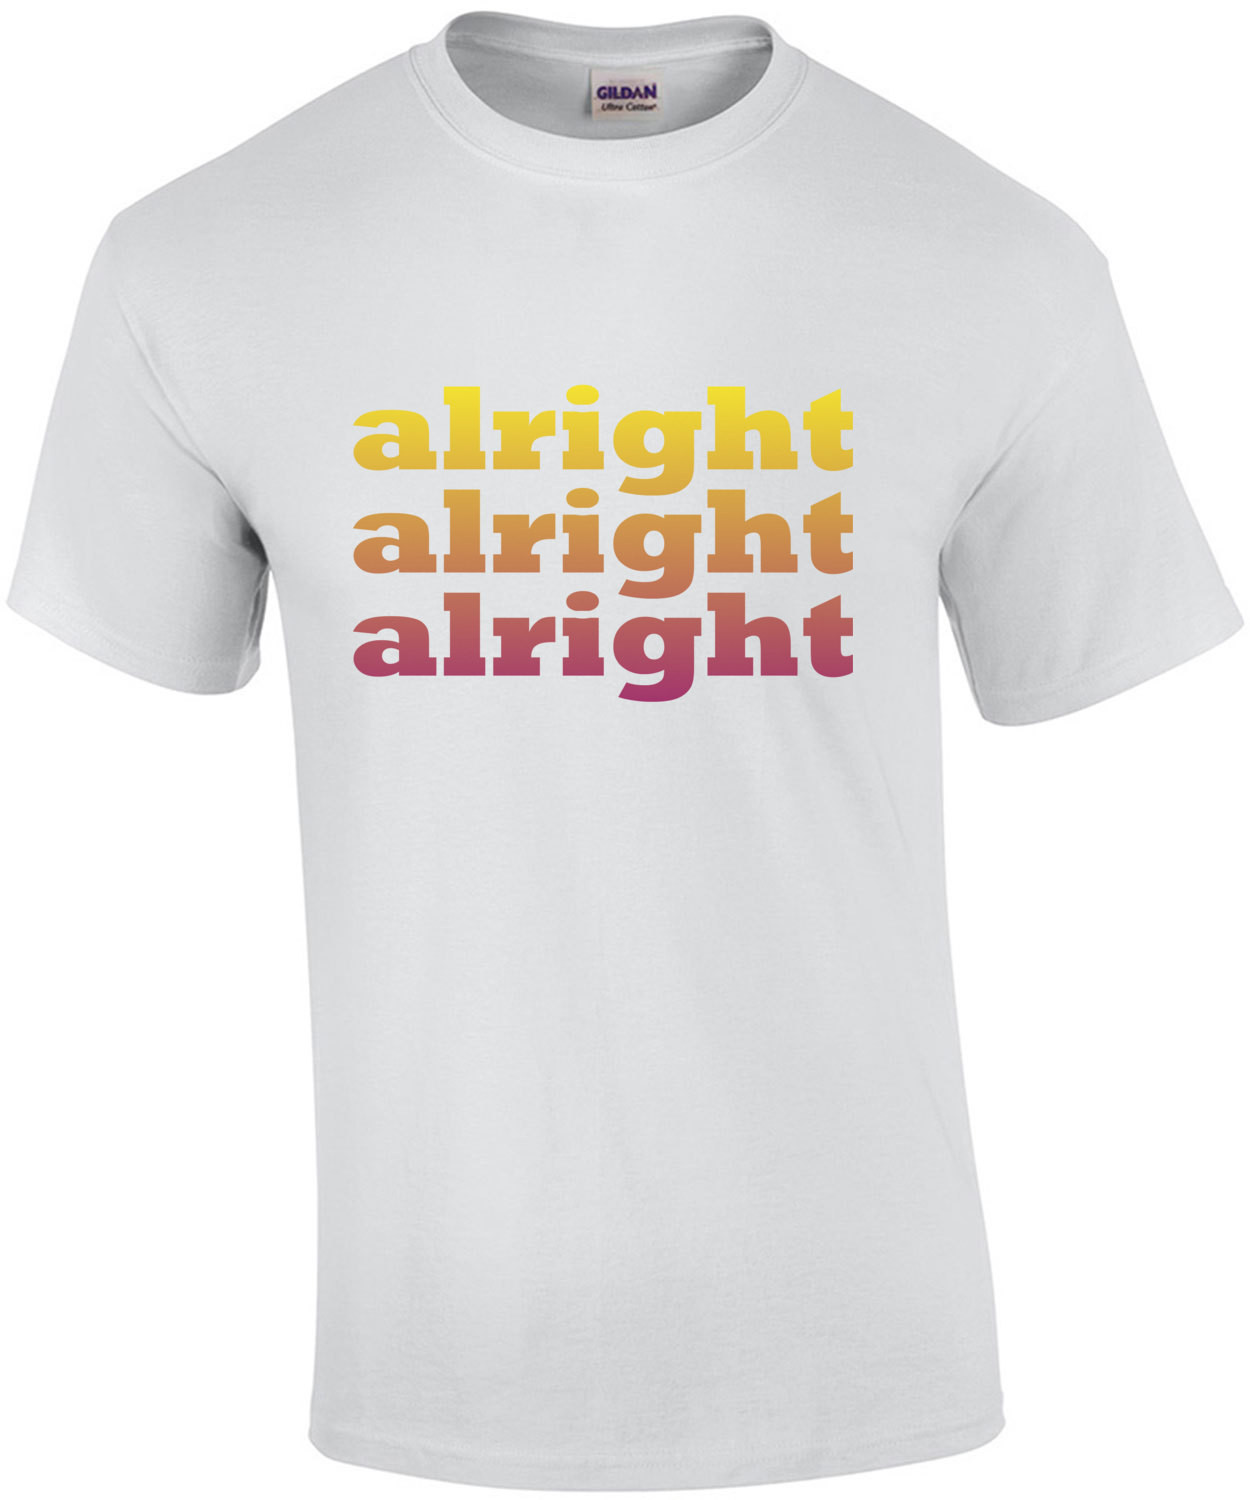 alright alright alright - Matthew Mcconaughey said it best in the classic 90's movie Dazed and Confused - Funny T-Shirt